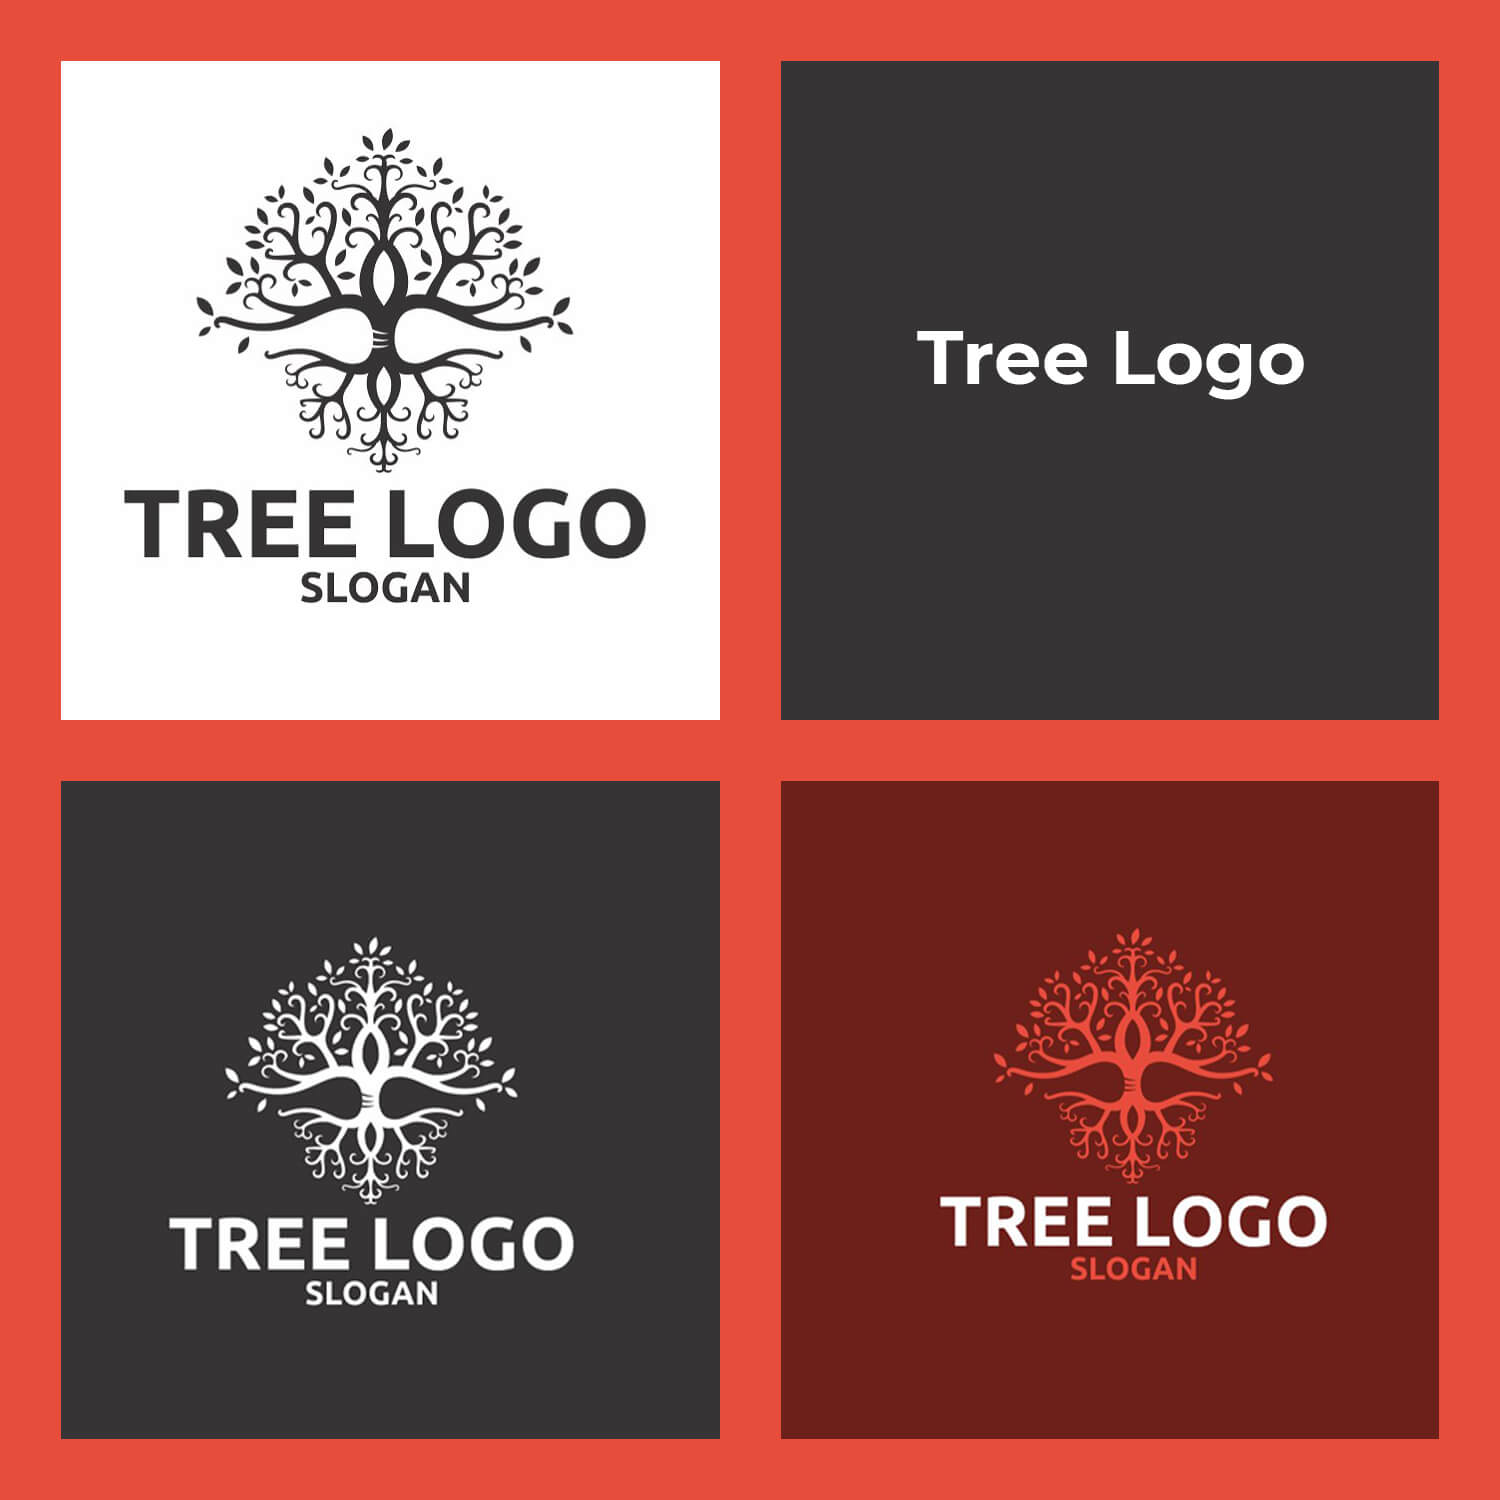 Three tree logos with swirls in squares: black and white, white on grey, scarlet as blood.